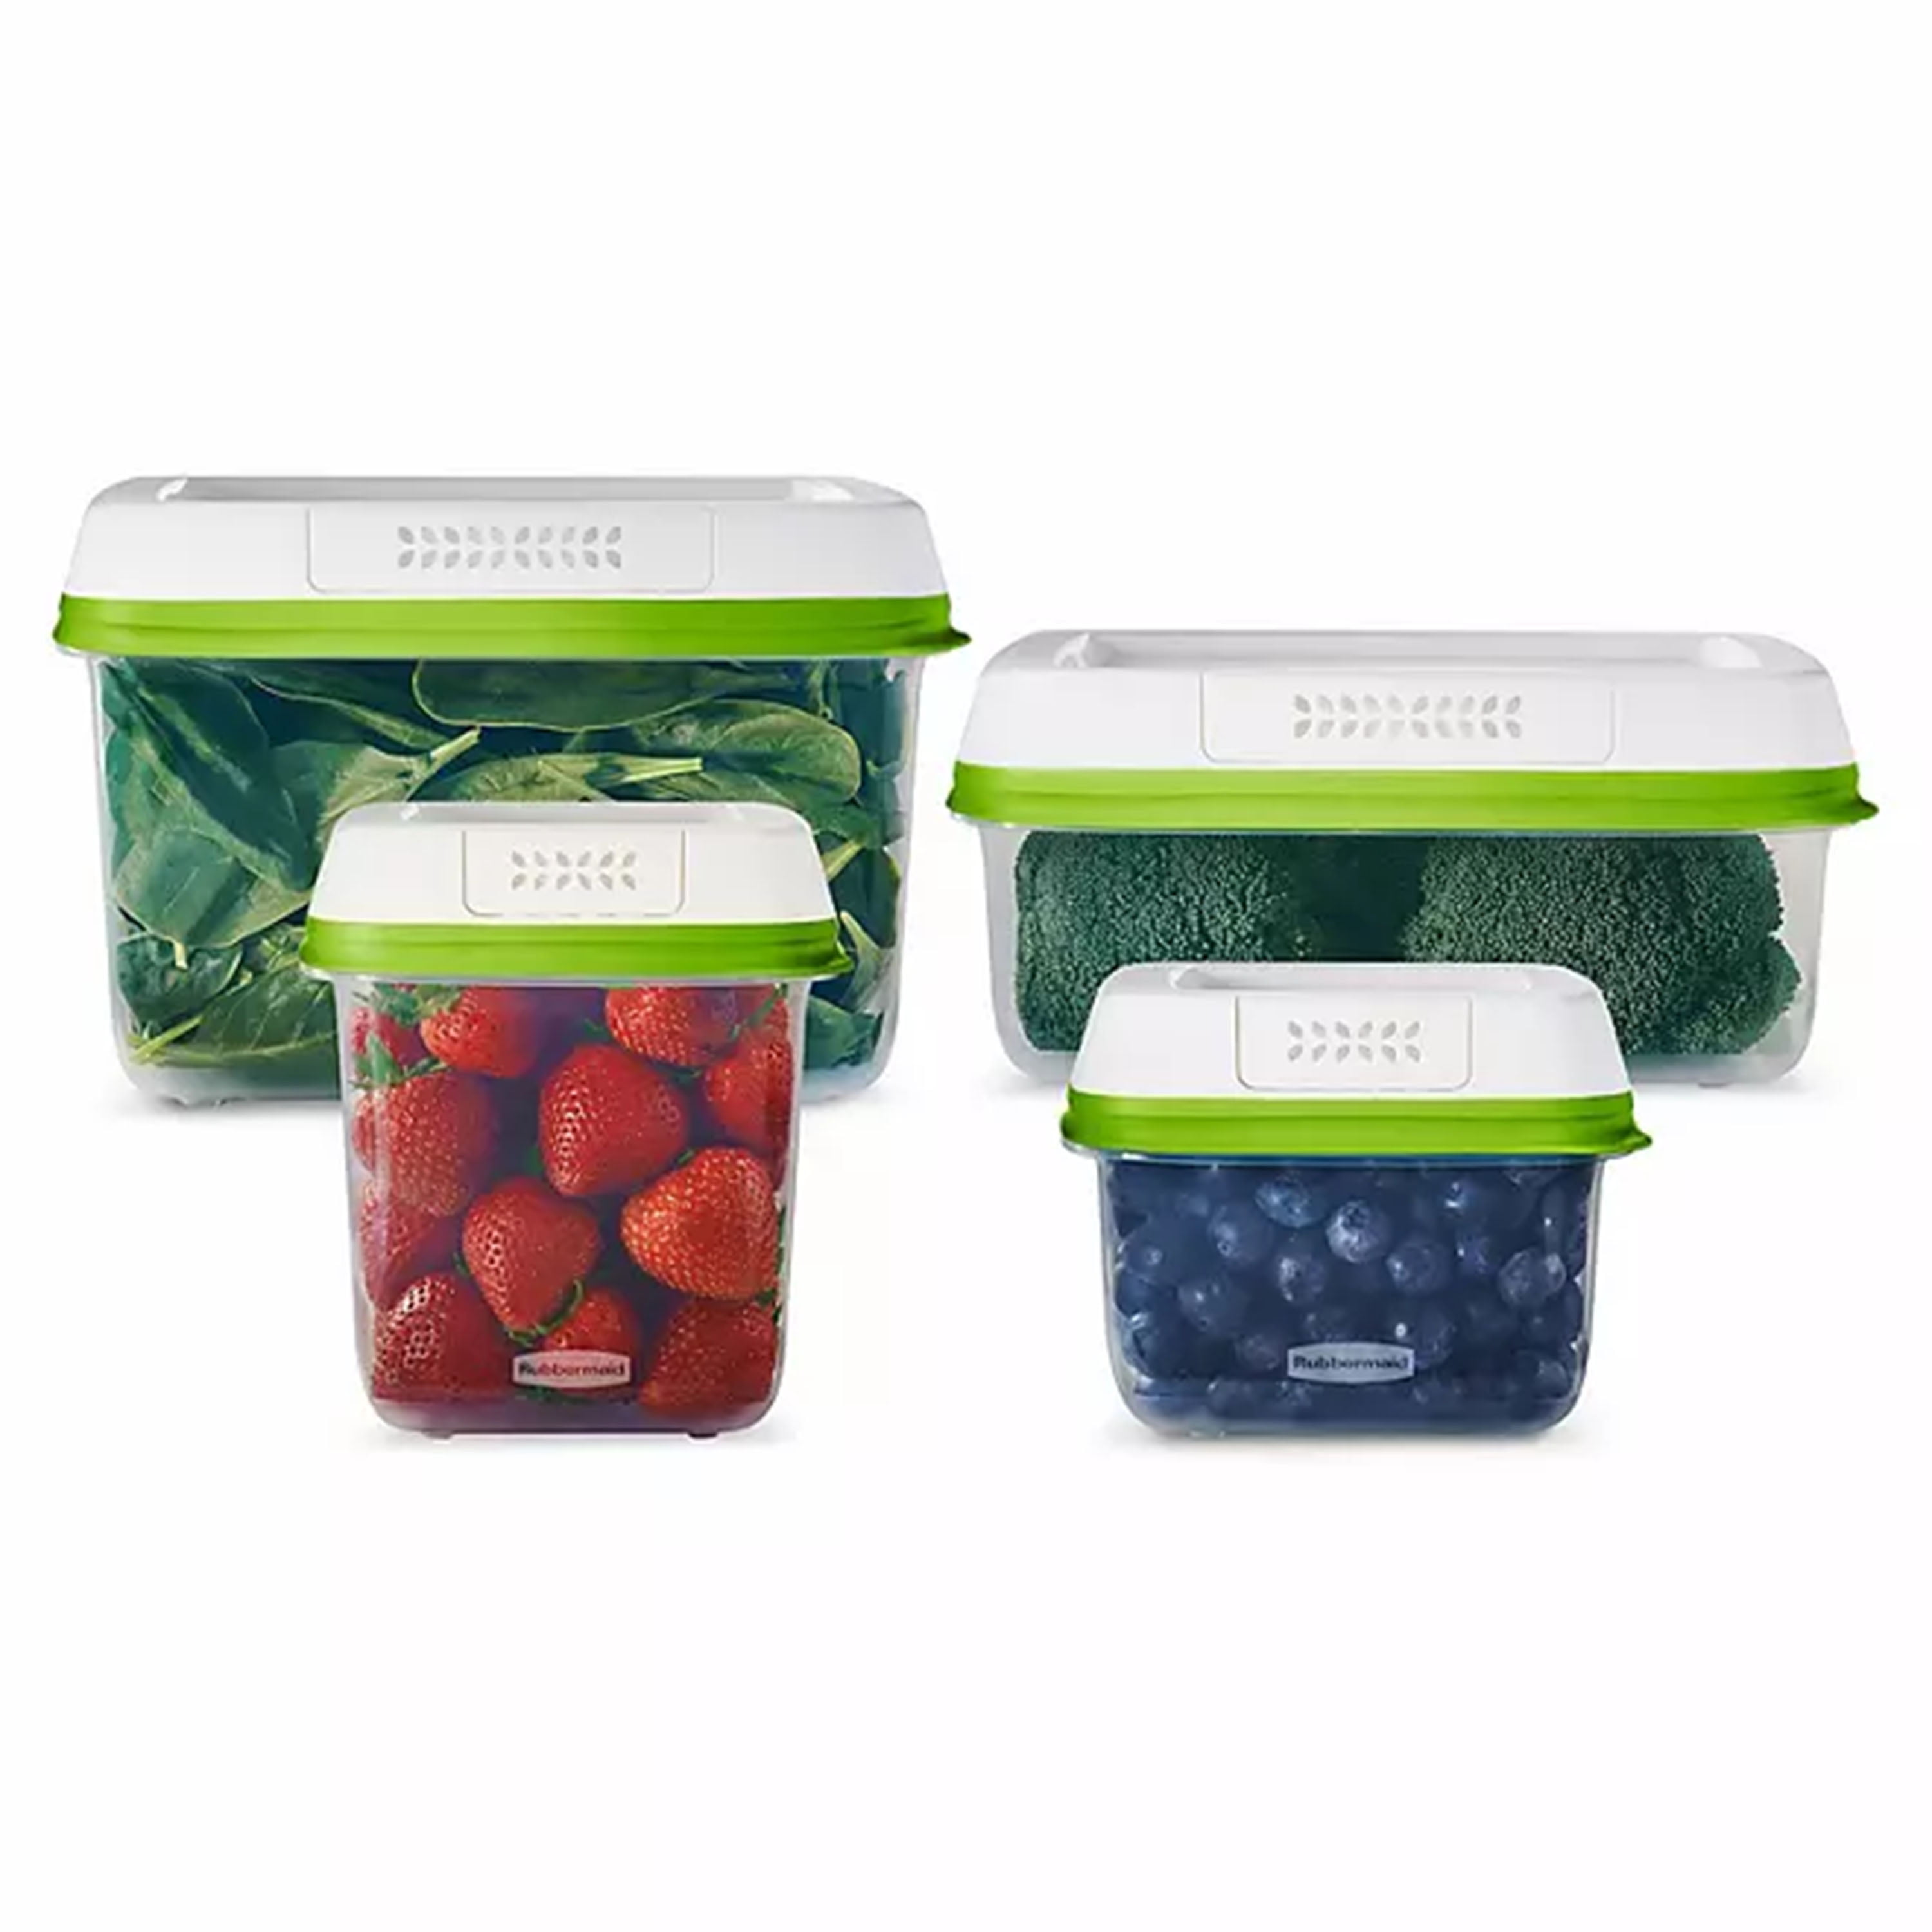 Rubbermaid Freshworks Produce Saver Container Set, 3 pc - Kroger